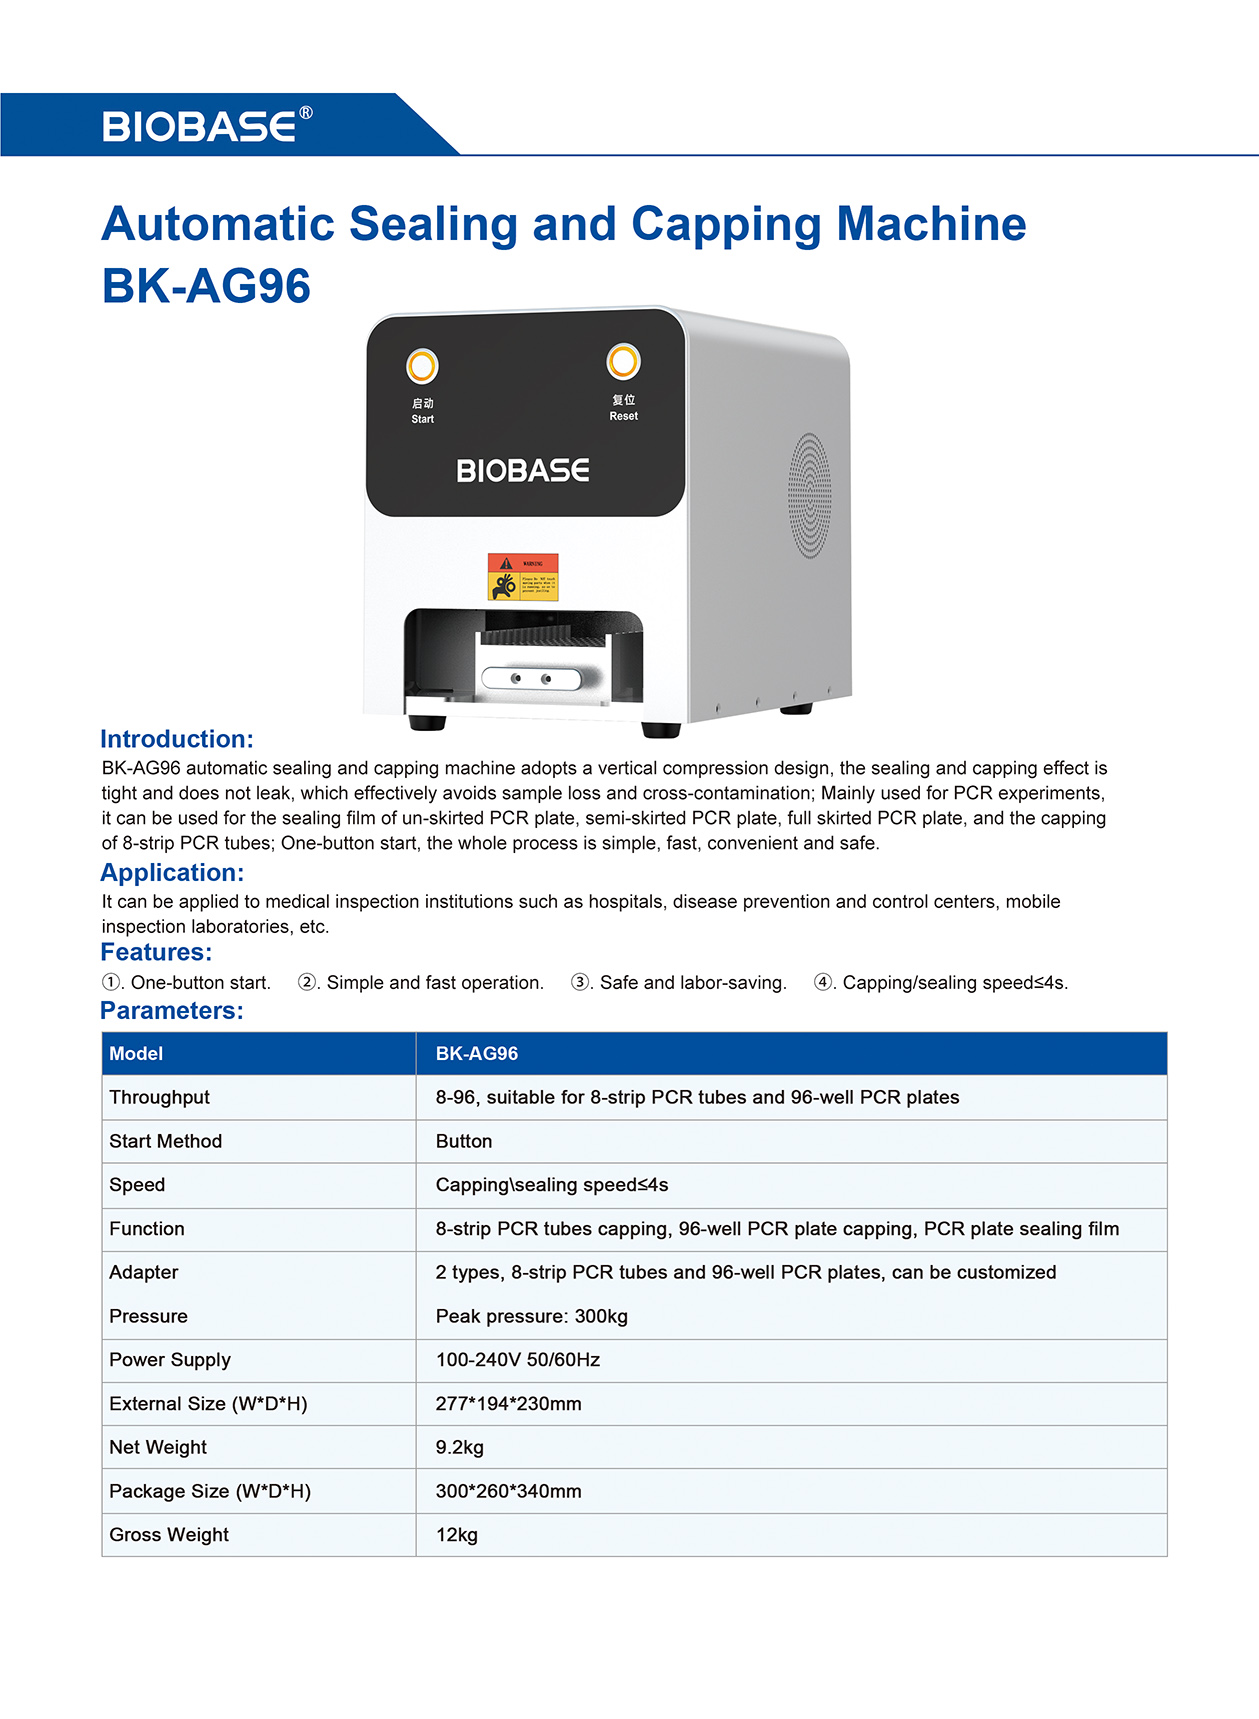 Automatic Sealing and Capping Machine BK-AG96